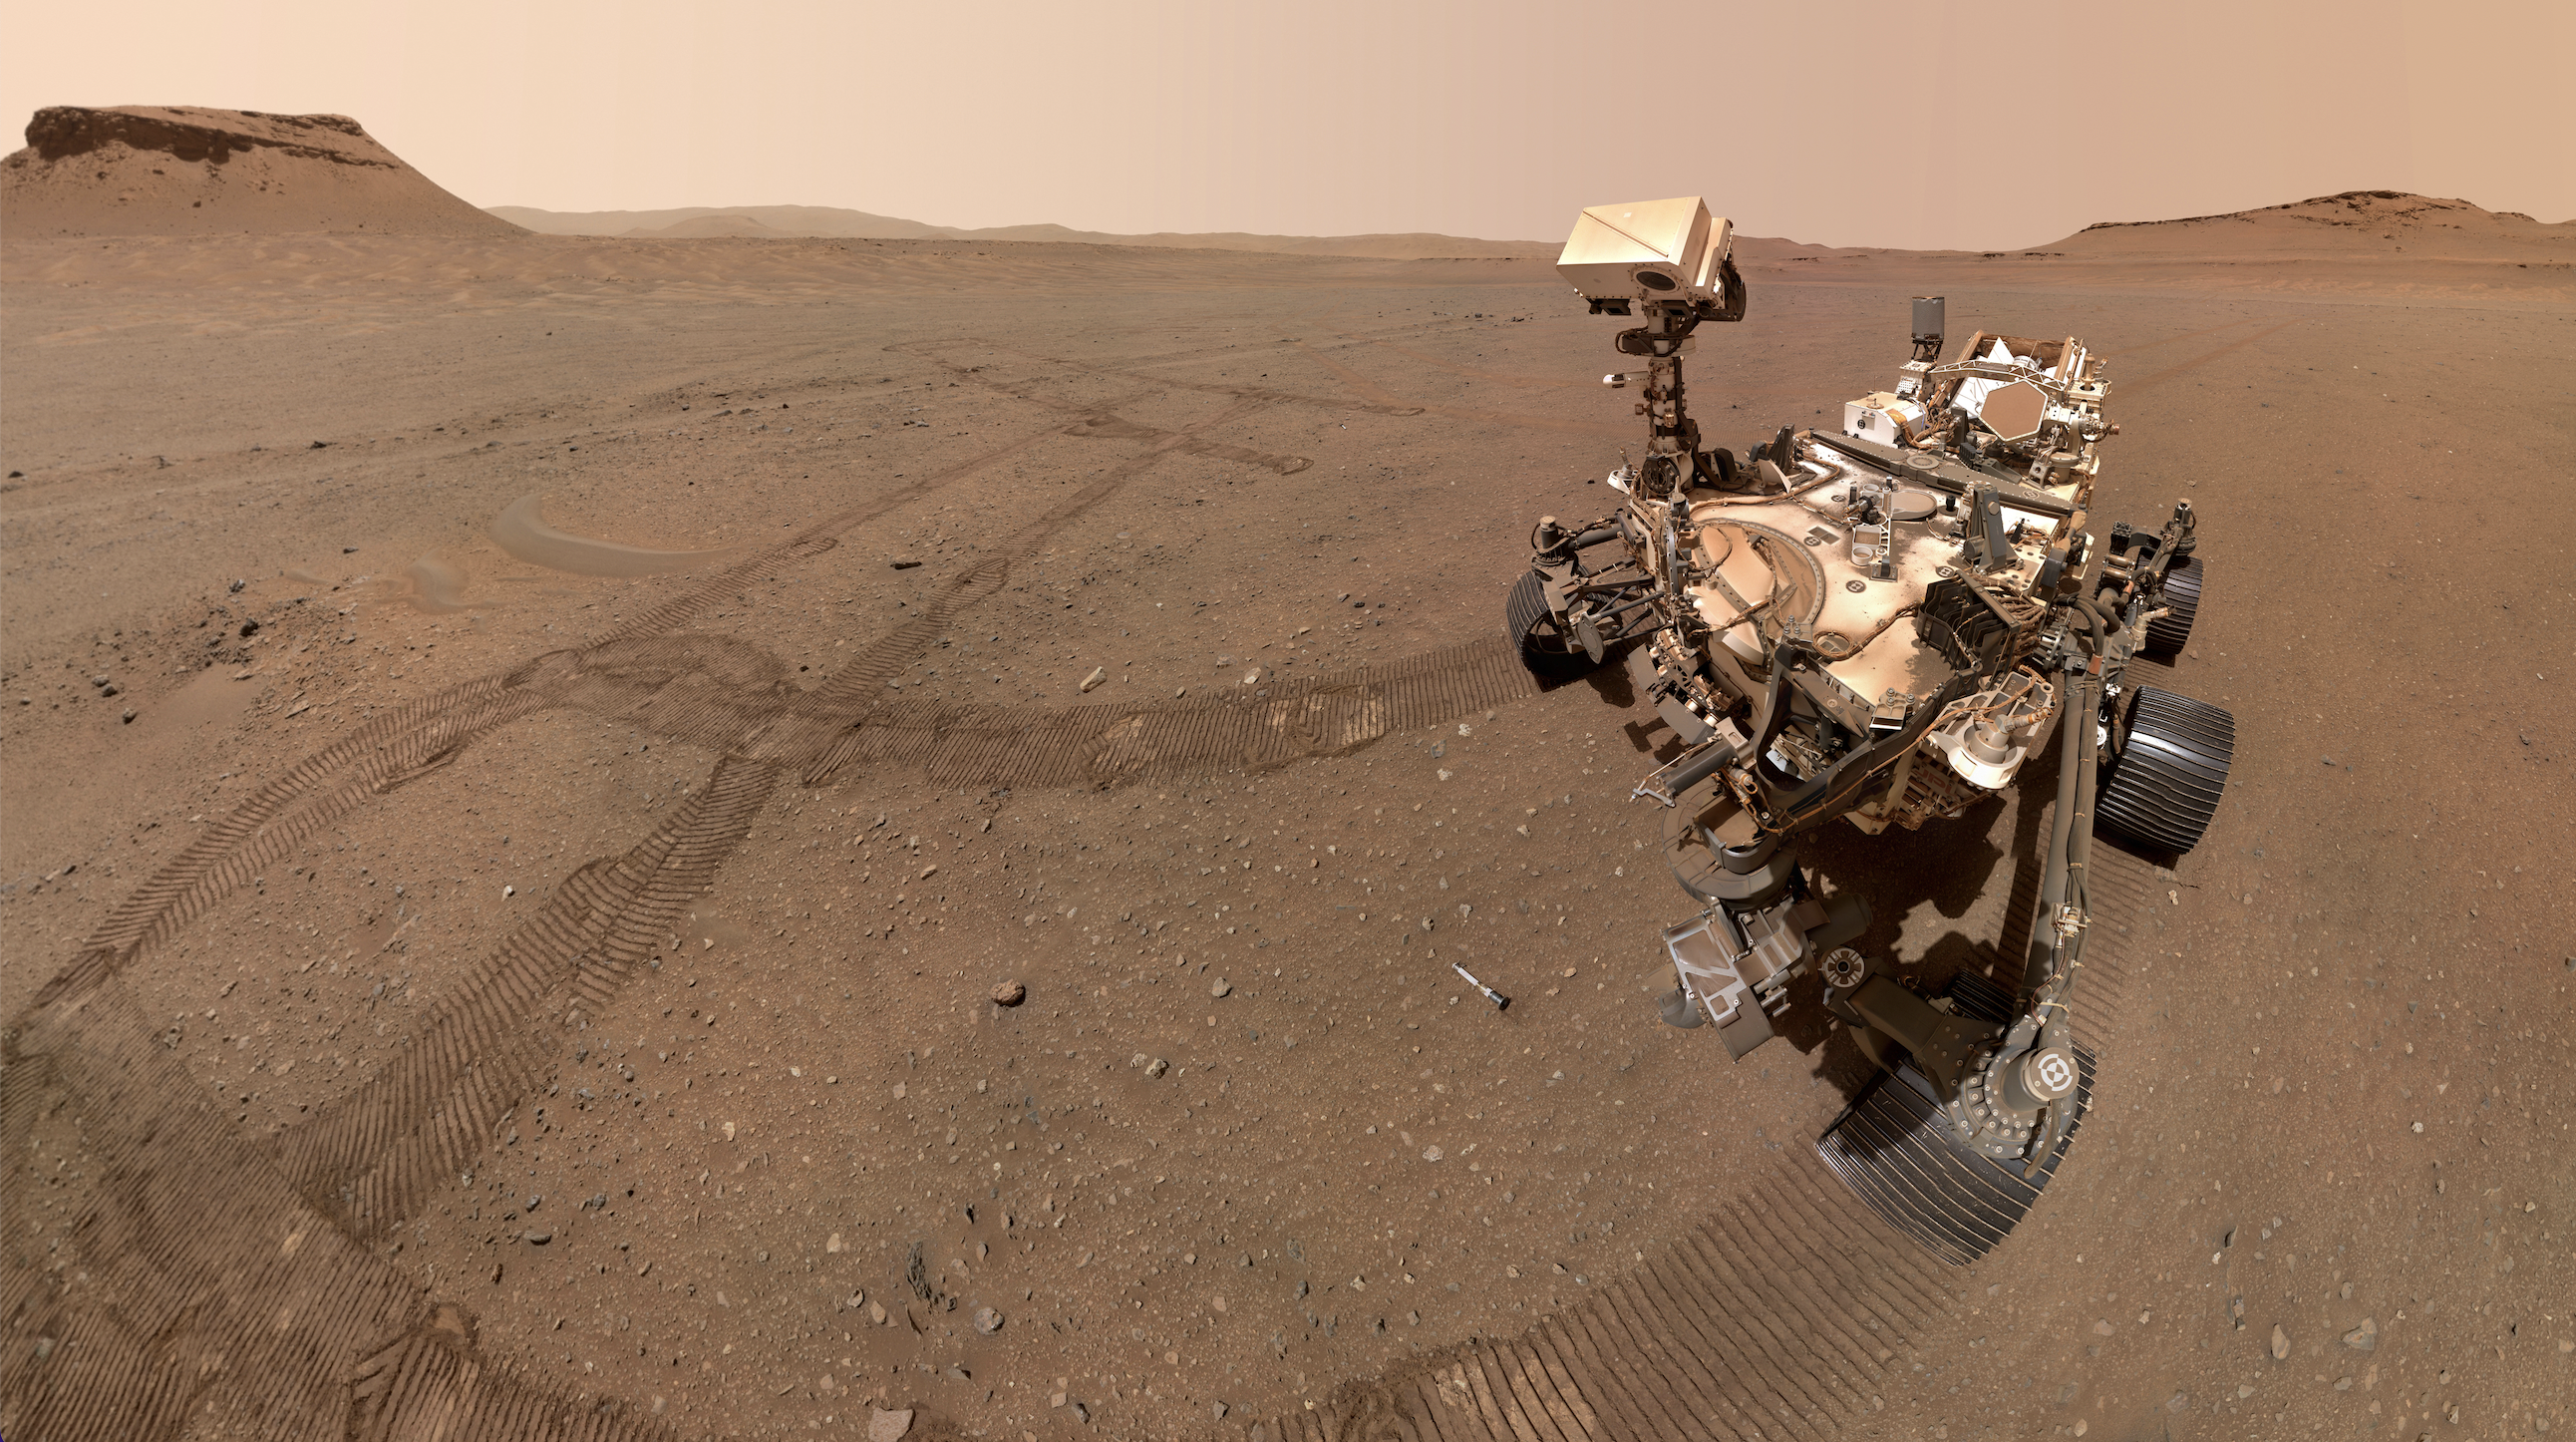 If the Perseverance rover found evidence of life on Mars, would we recognize it? Space